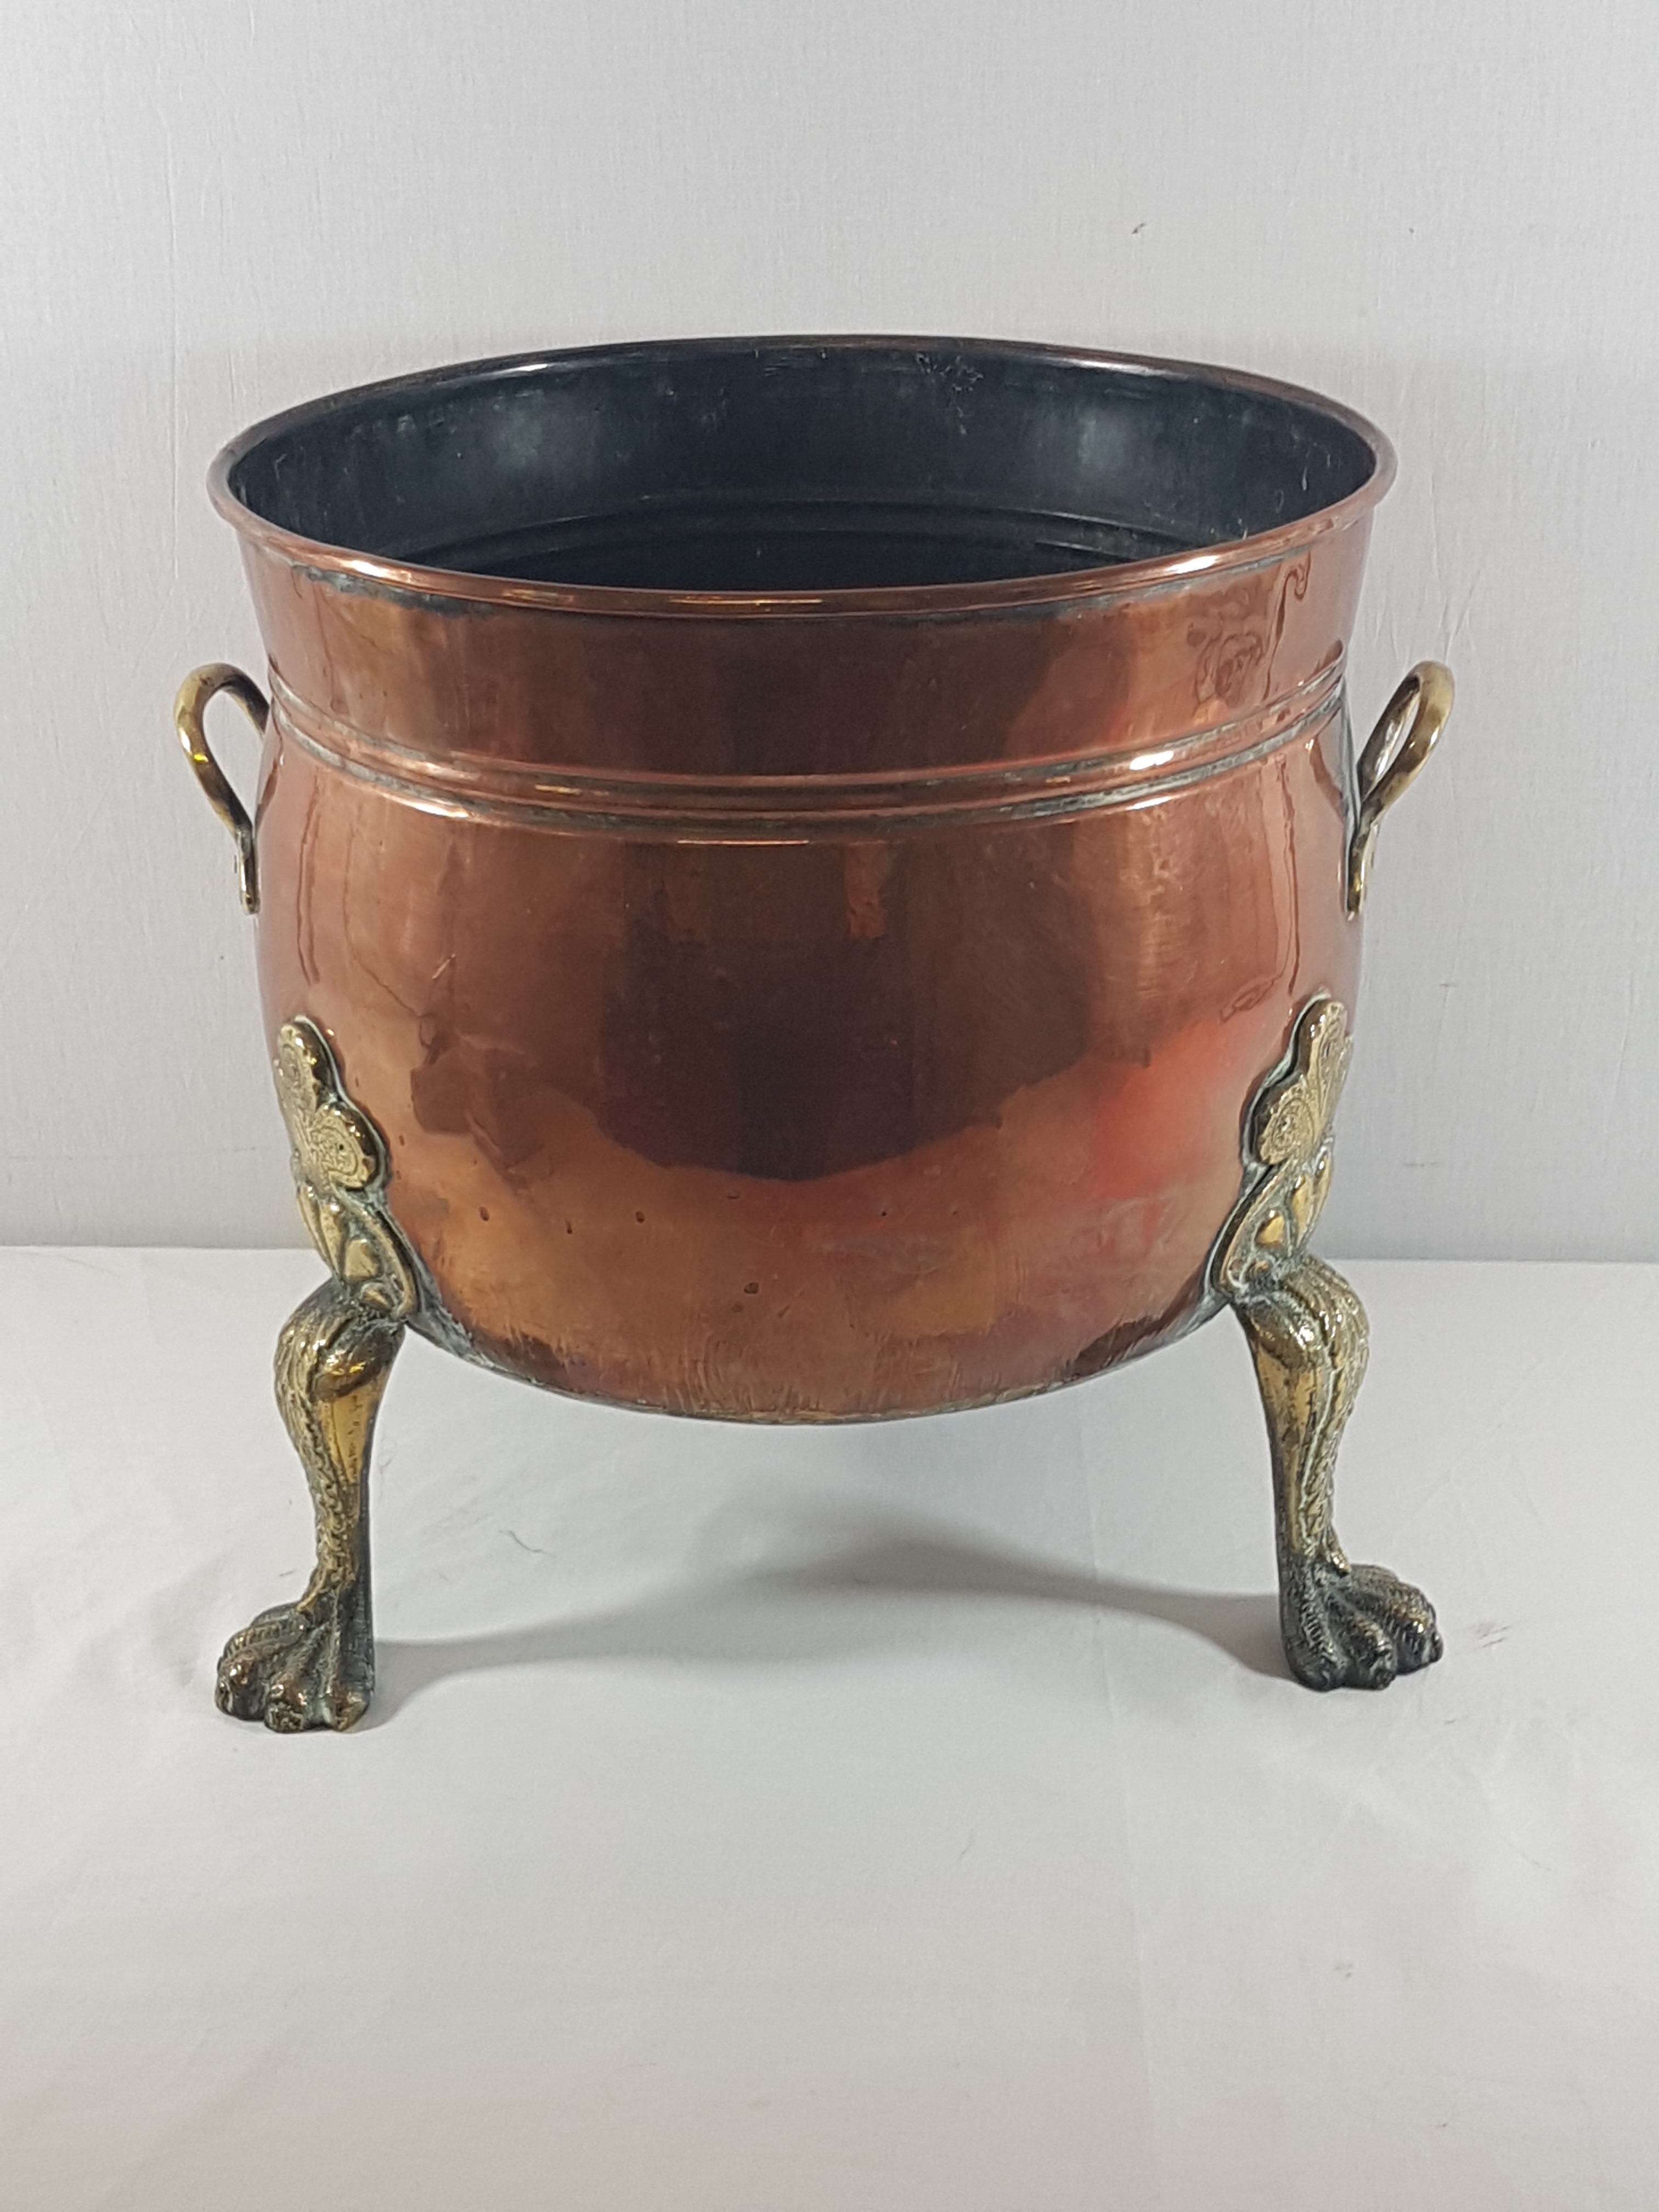 Large copper & brass planter terminating on 3 ornate legs, 14'' diameter and 14'' tall